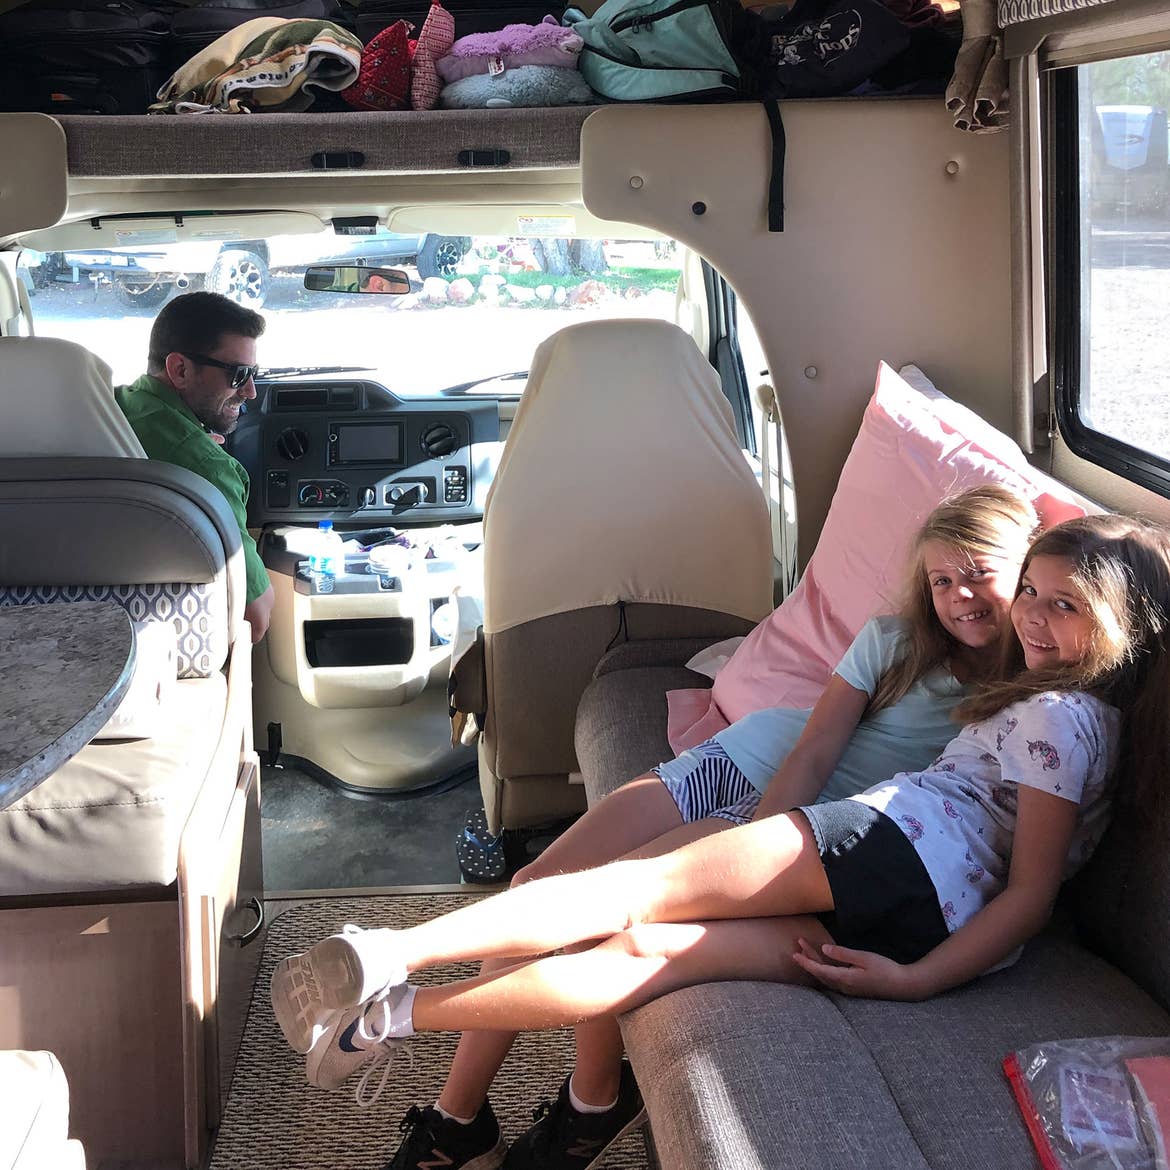 Josh (left) and their daughters (right) seated in their RV rental ready for departure.